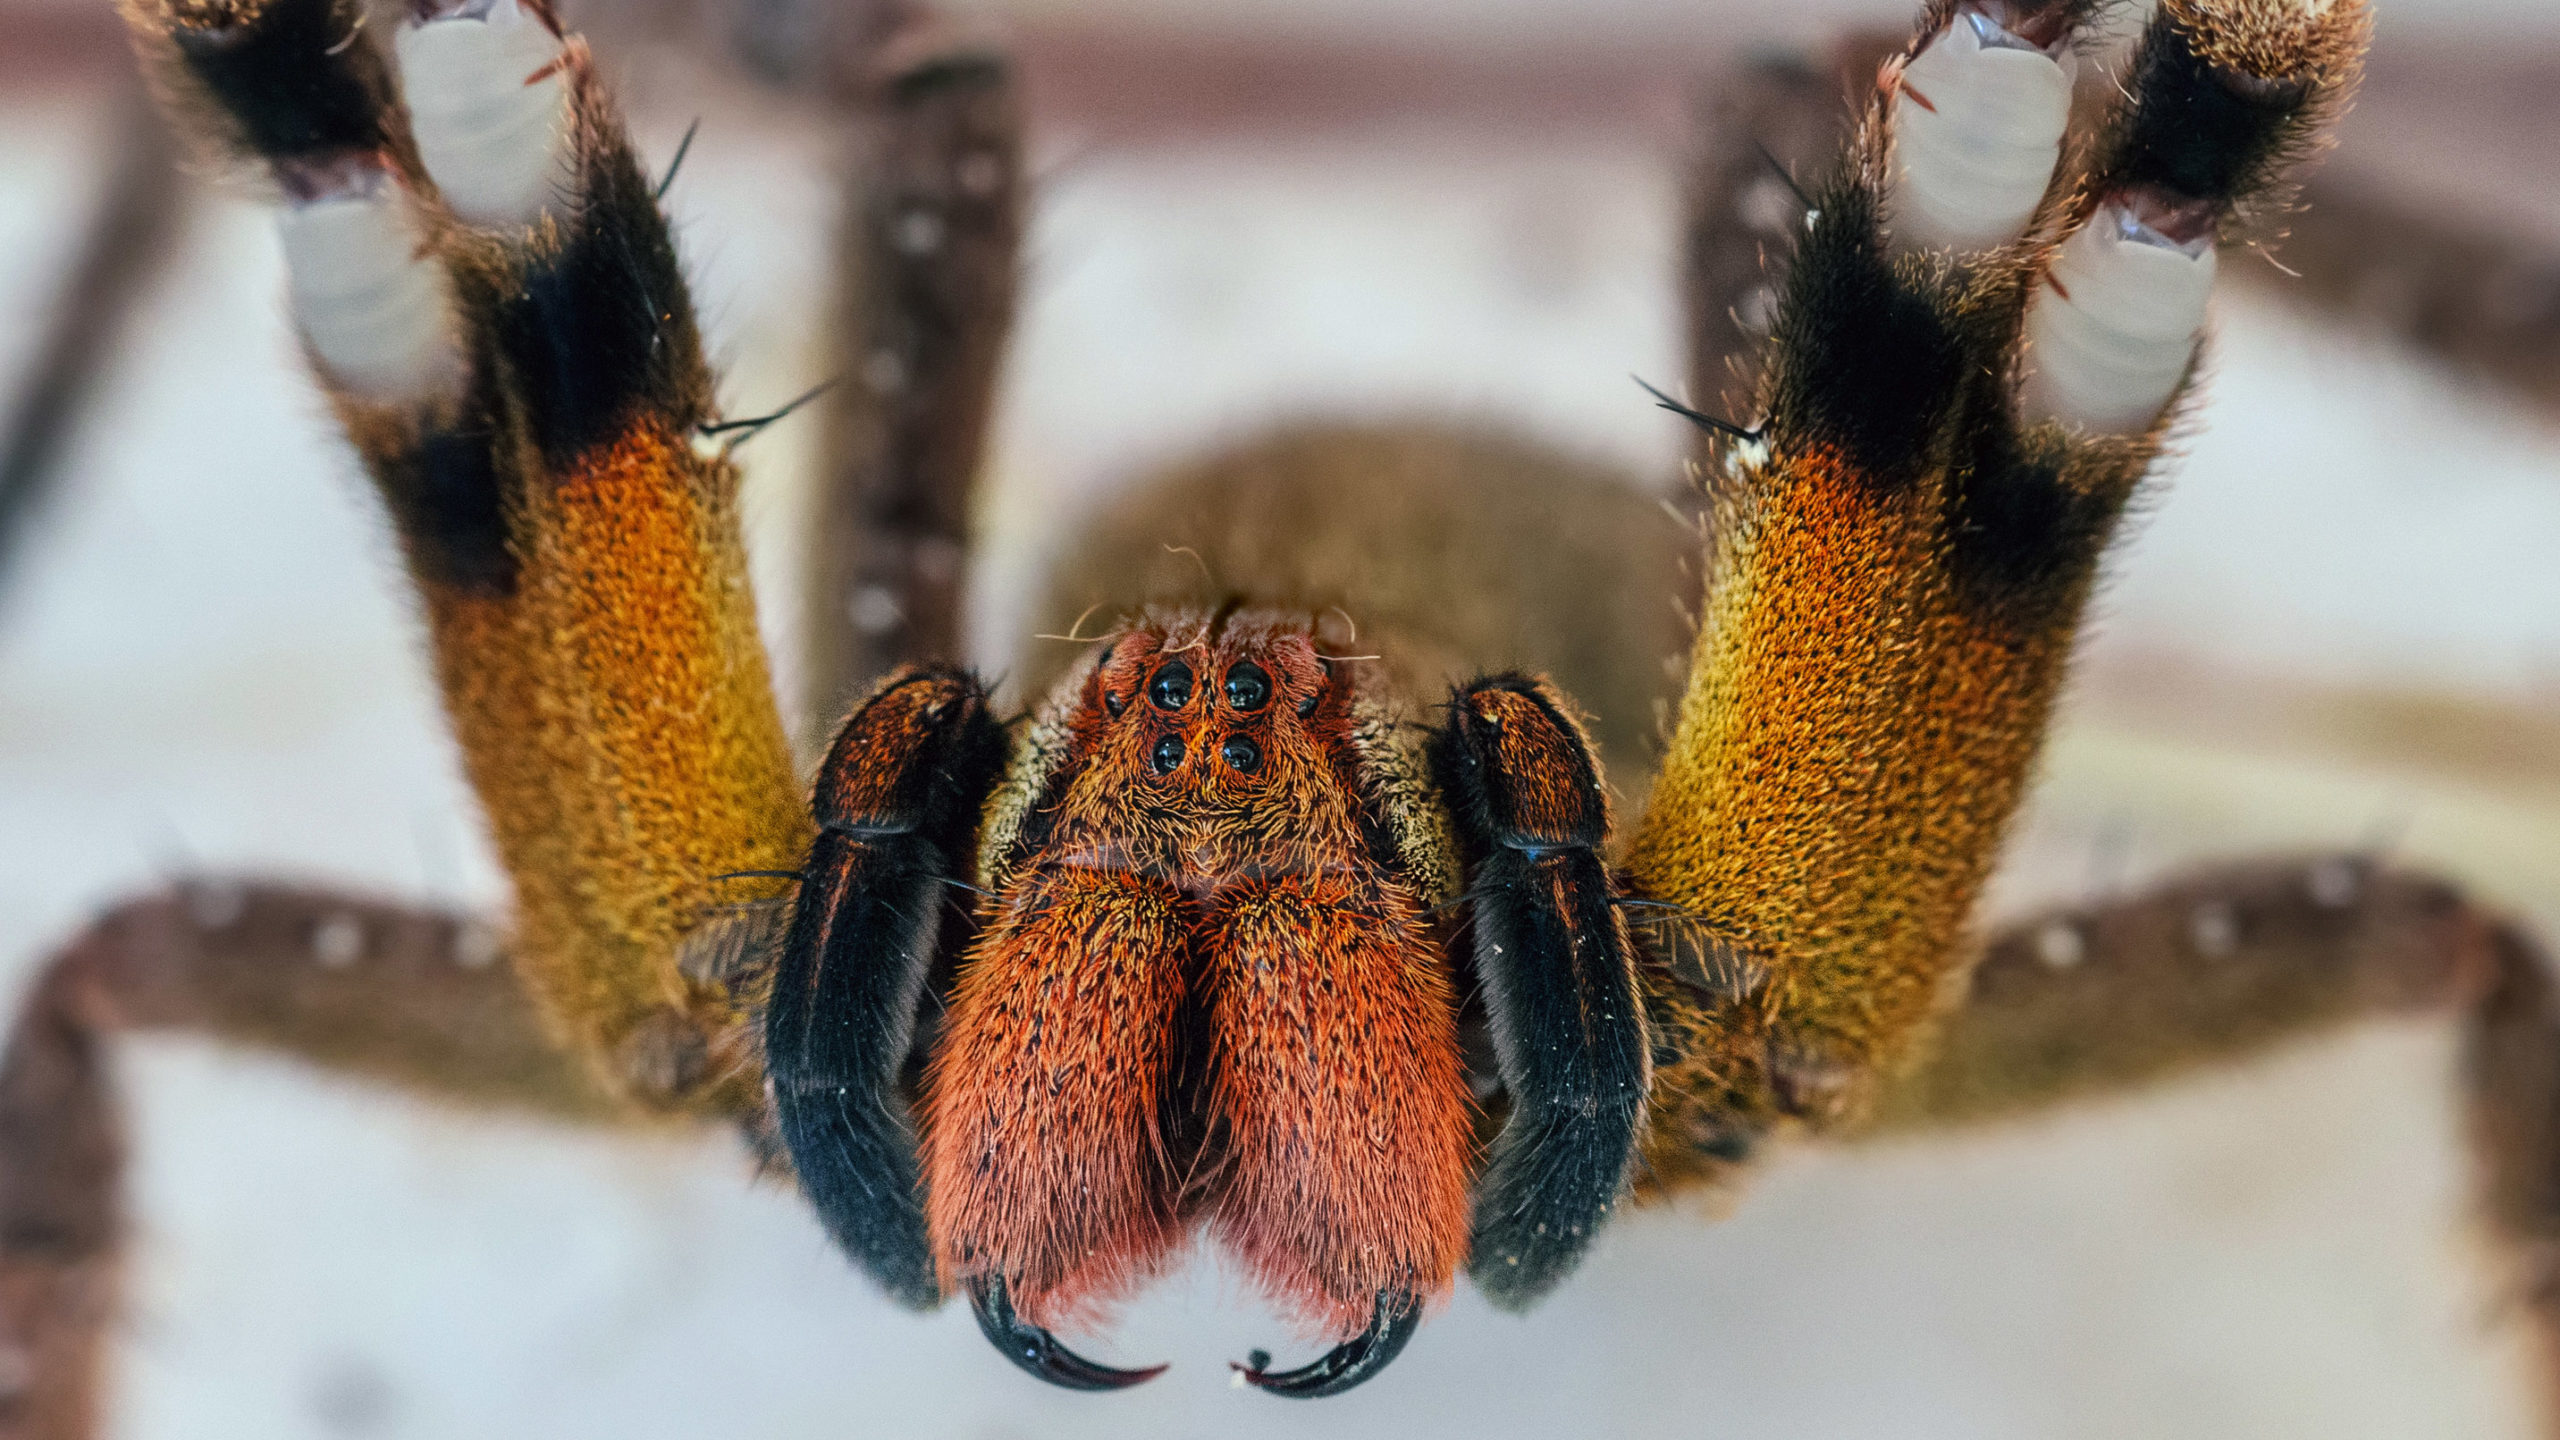 Brazilian Wandering Spider 5.9 Inches, The Top 30 Worlds Biggest Spiders 2022 Update